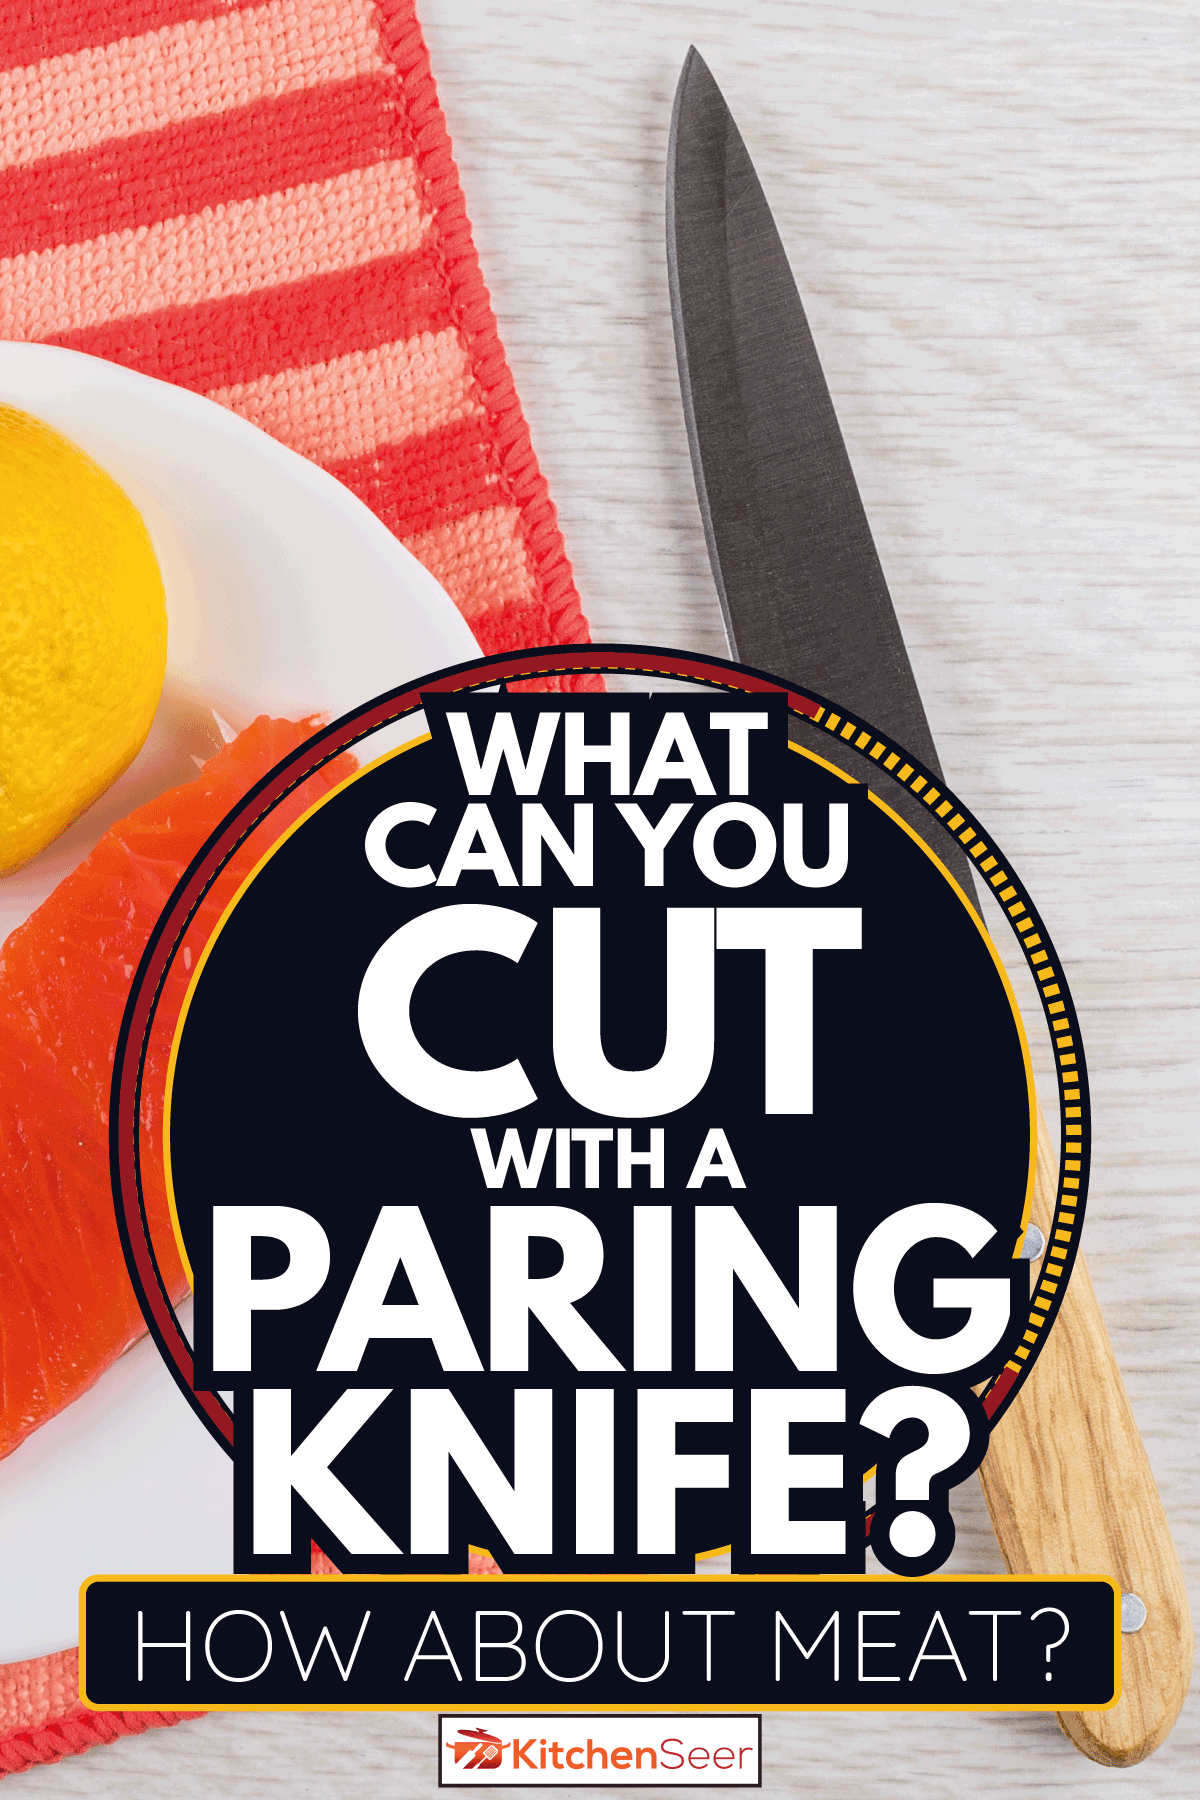 Slices of lemon, piece of salmon in plate on red napkin, kitchen knife on wooden table. What Can You Cut With A Paring Knife [How About Meat]